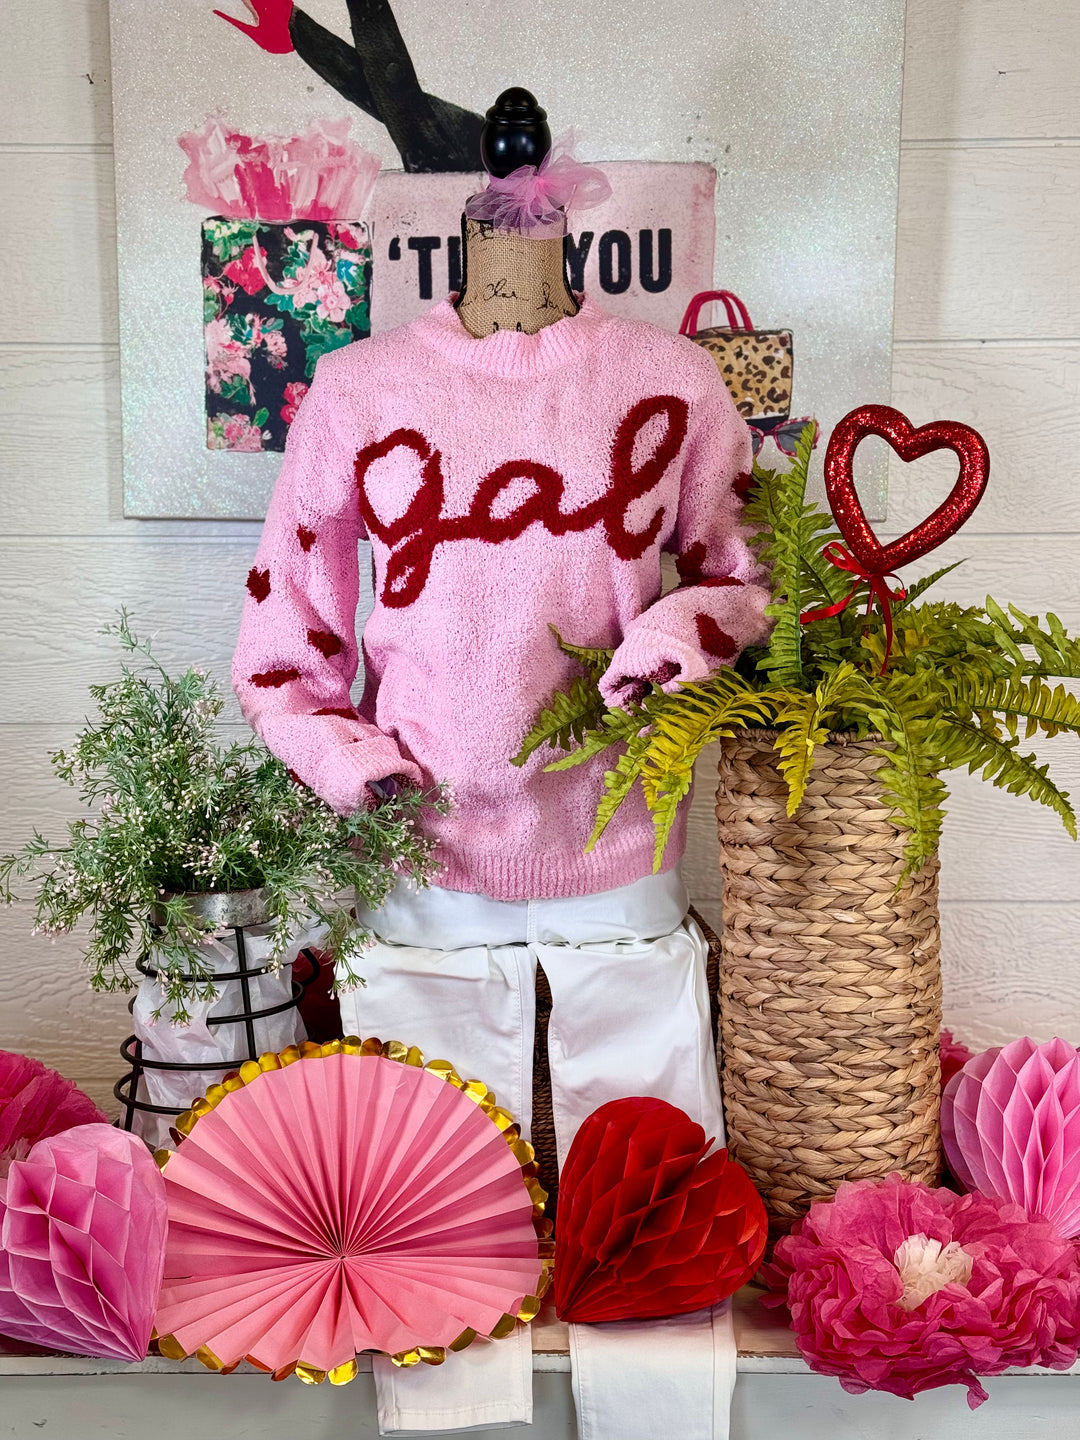 Pink "Gal" Fuzzy Sweater - S-Extended Sizes - Final Sale